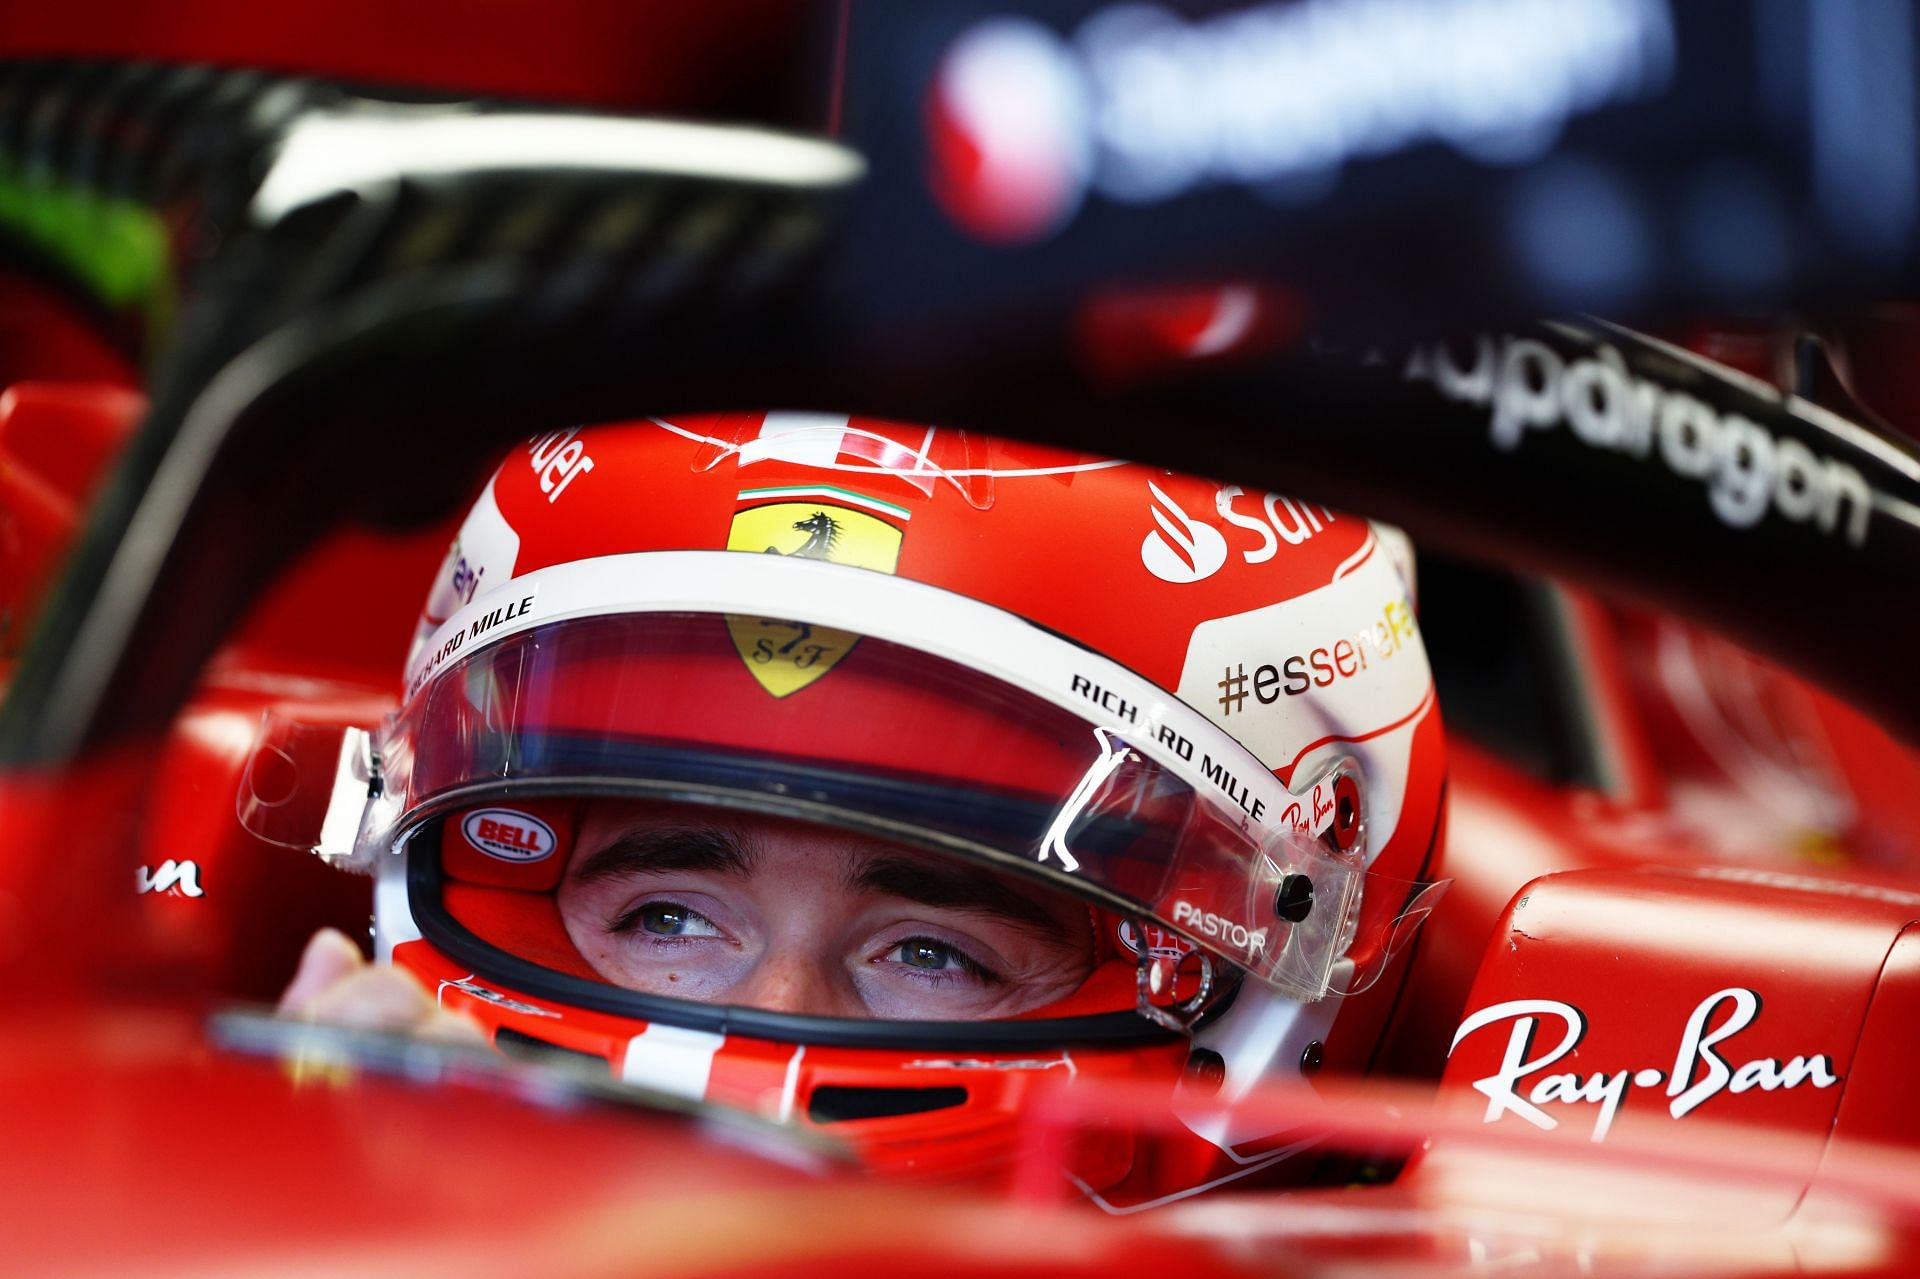 Charles Leclerc faces a 49-point deficit to Max Verstappen